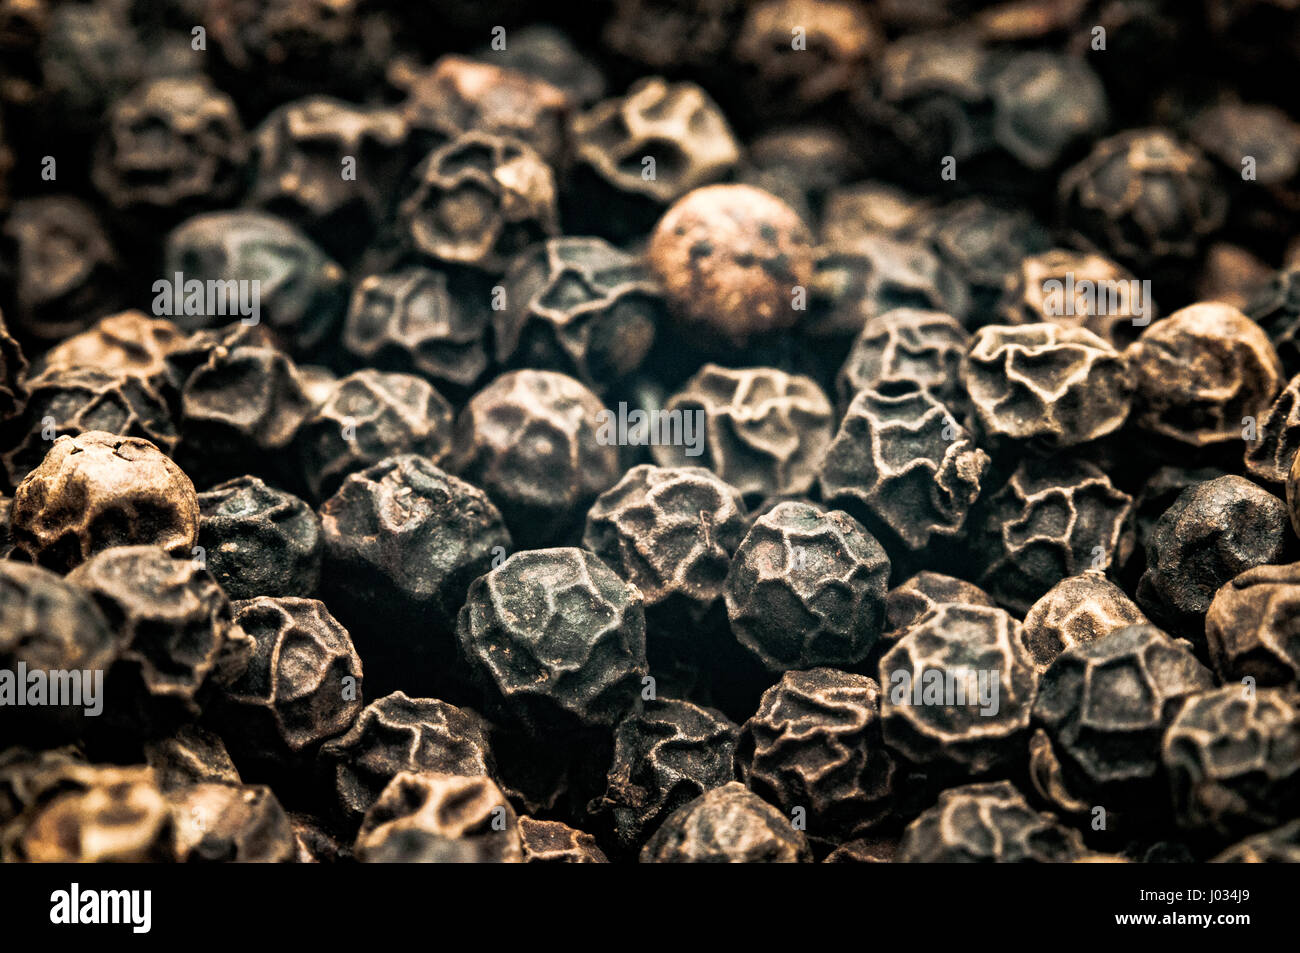 Extreme close-up  of black peppercorns Stock Photo